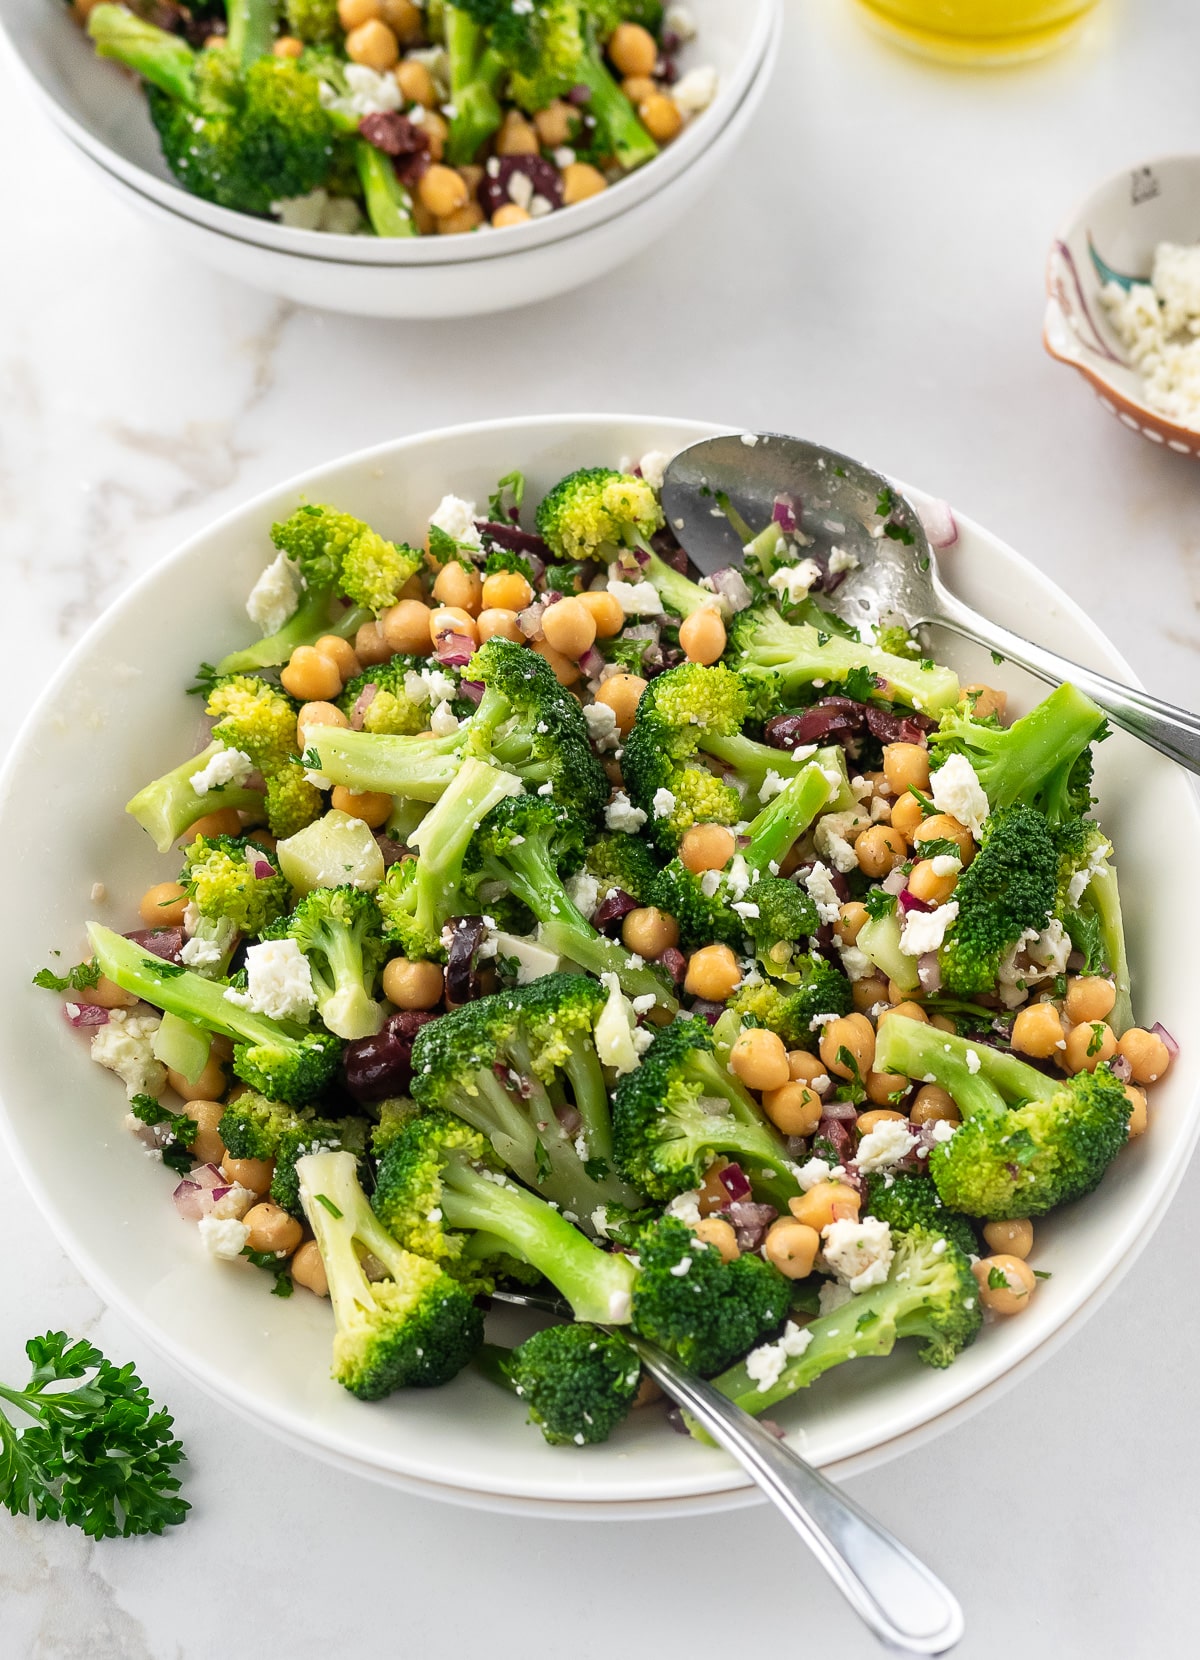 Bowl of chickpea and broccoli salad tossed in lemon and olive oil dressing.